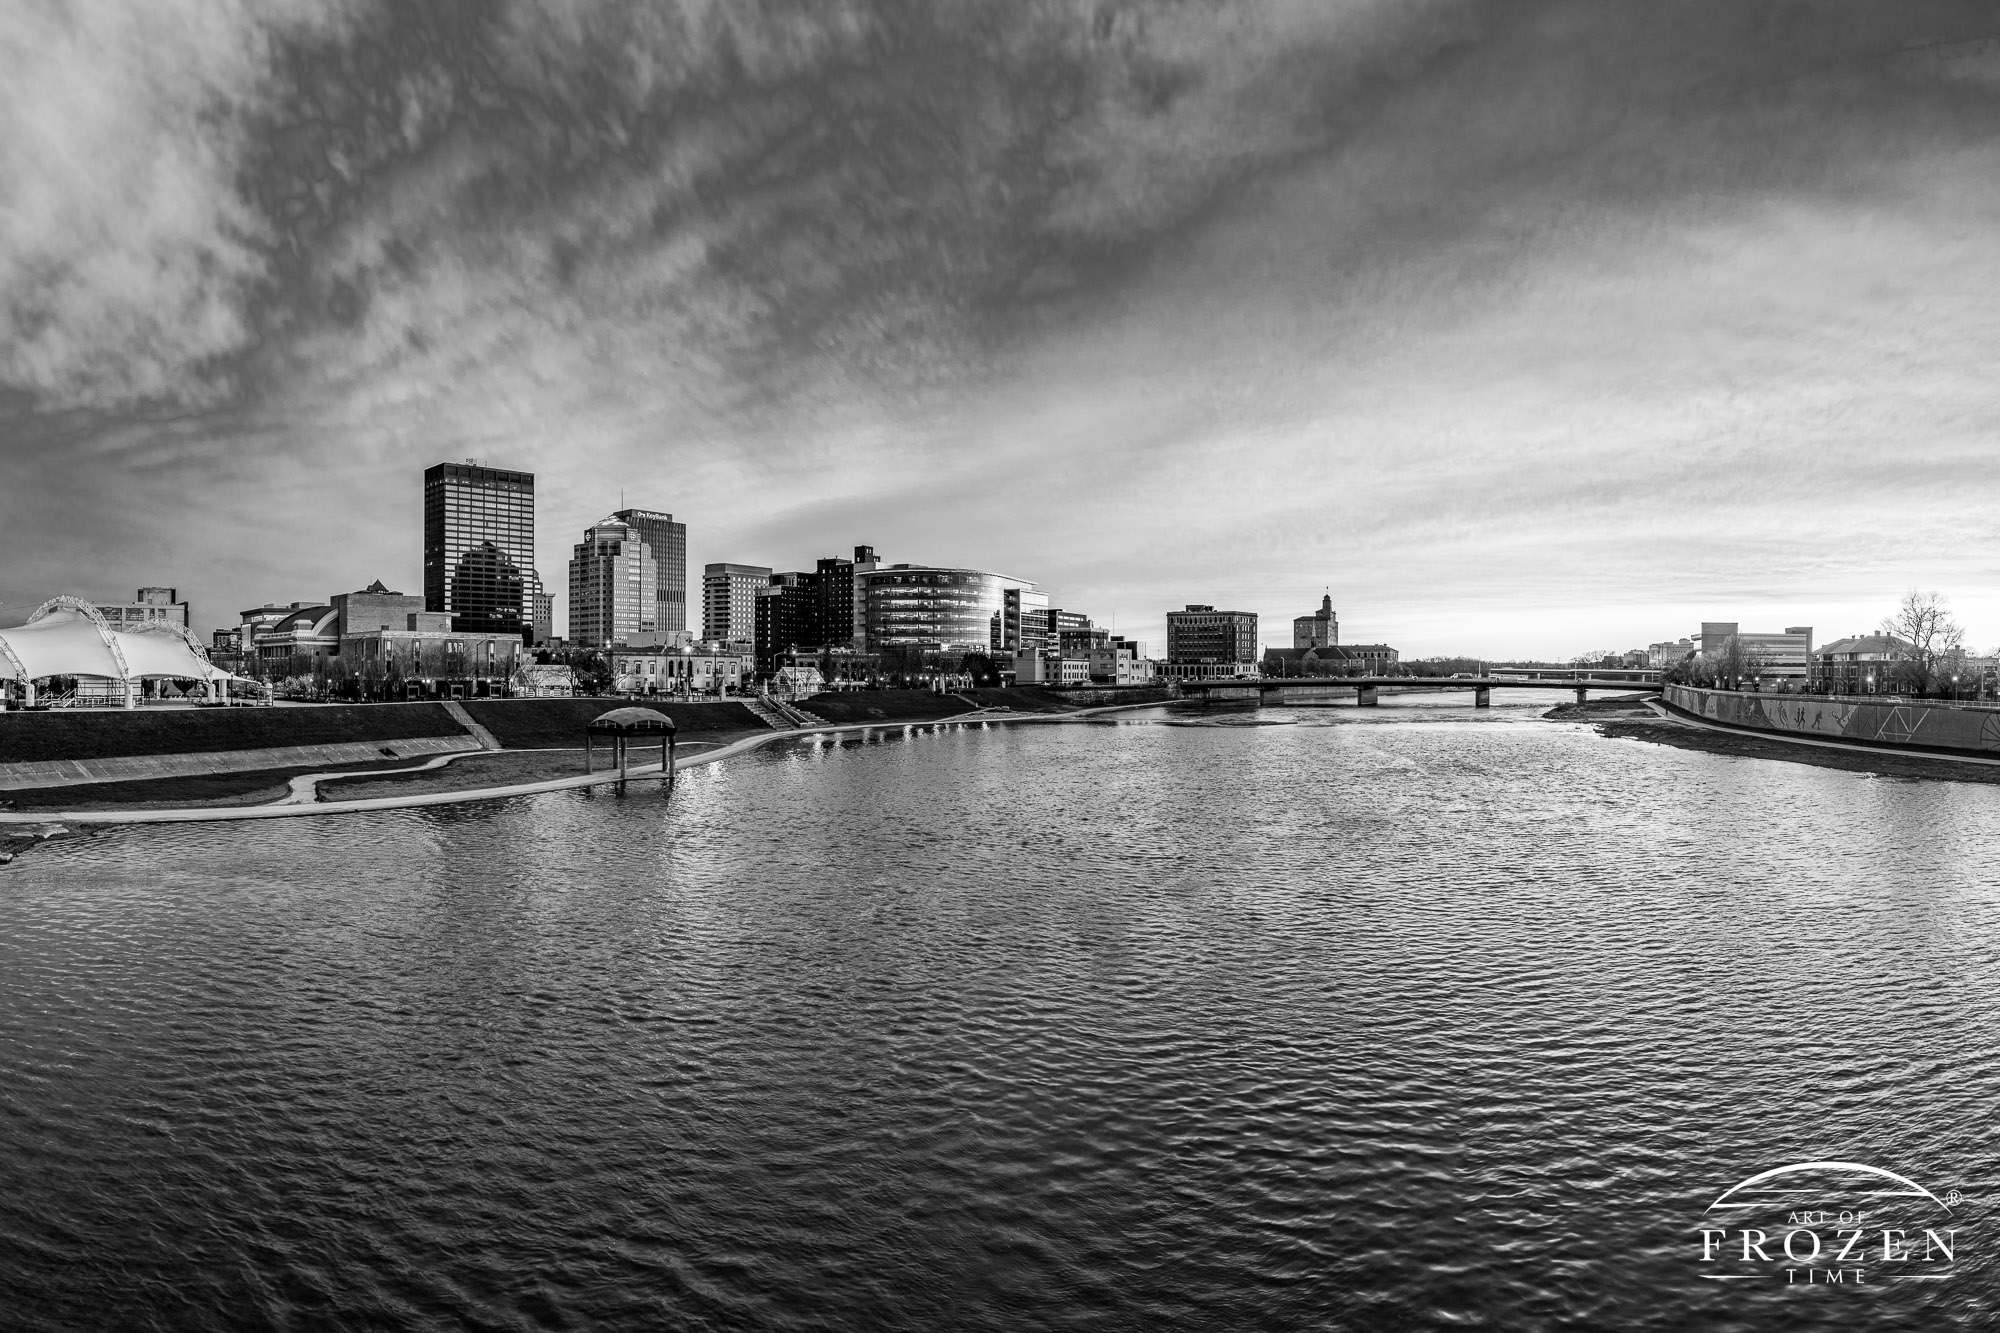 A black and white view of the Dayton Skyline during a windy sunset where the sun illuminated the underside of the clouds